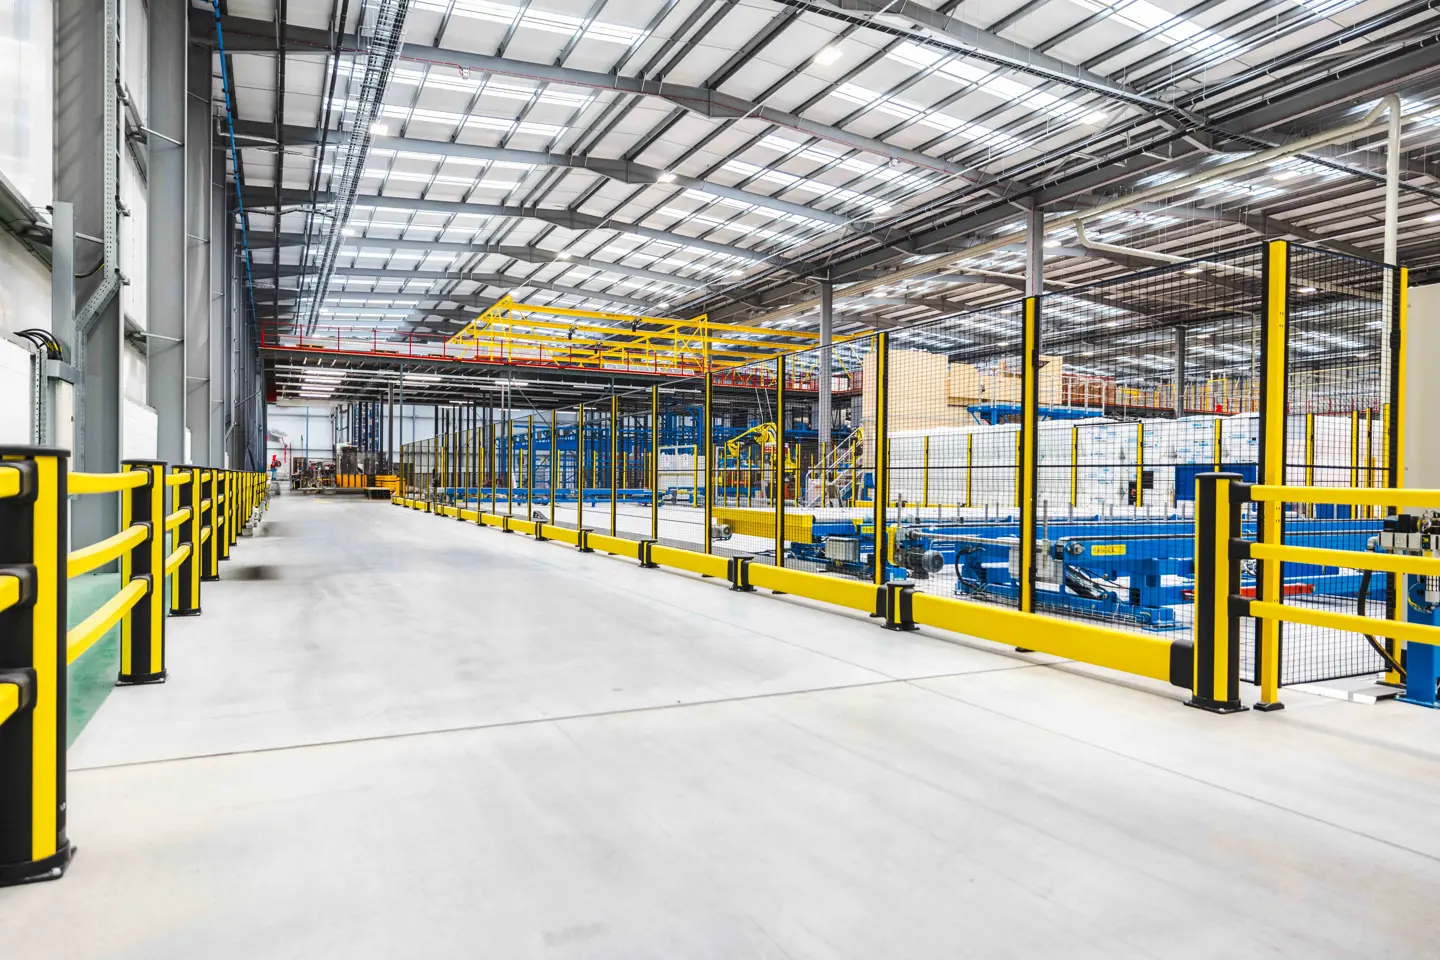 Pedestrian barrier and impact protection on warehouse and factory floor